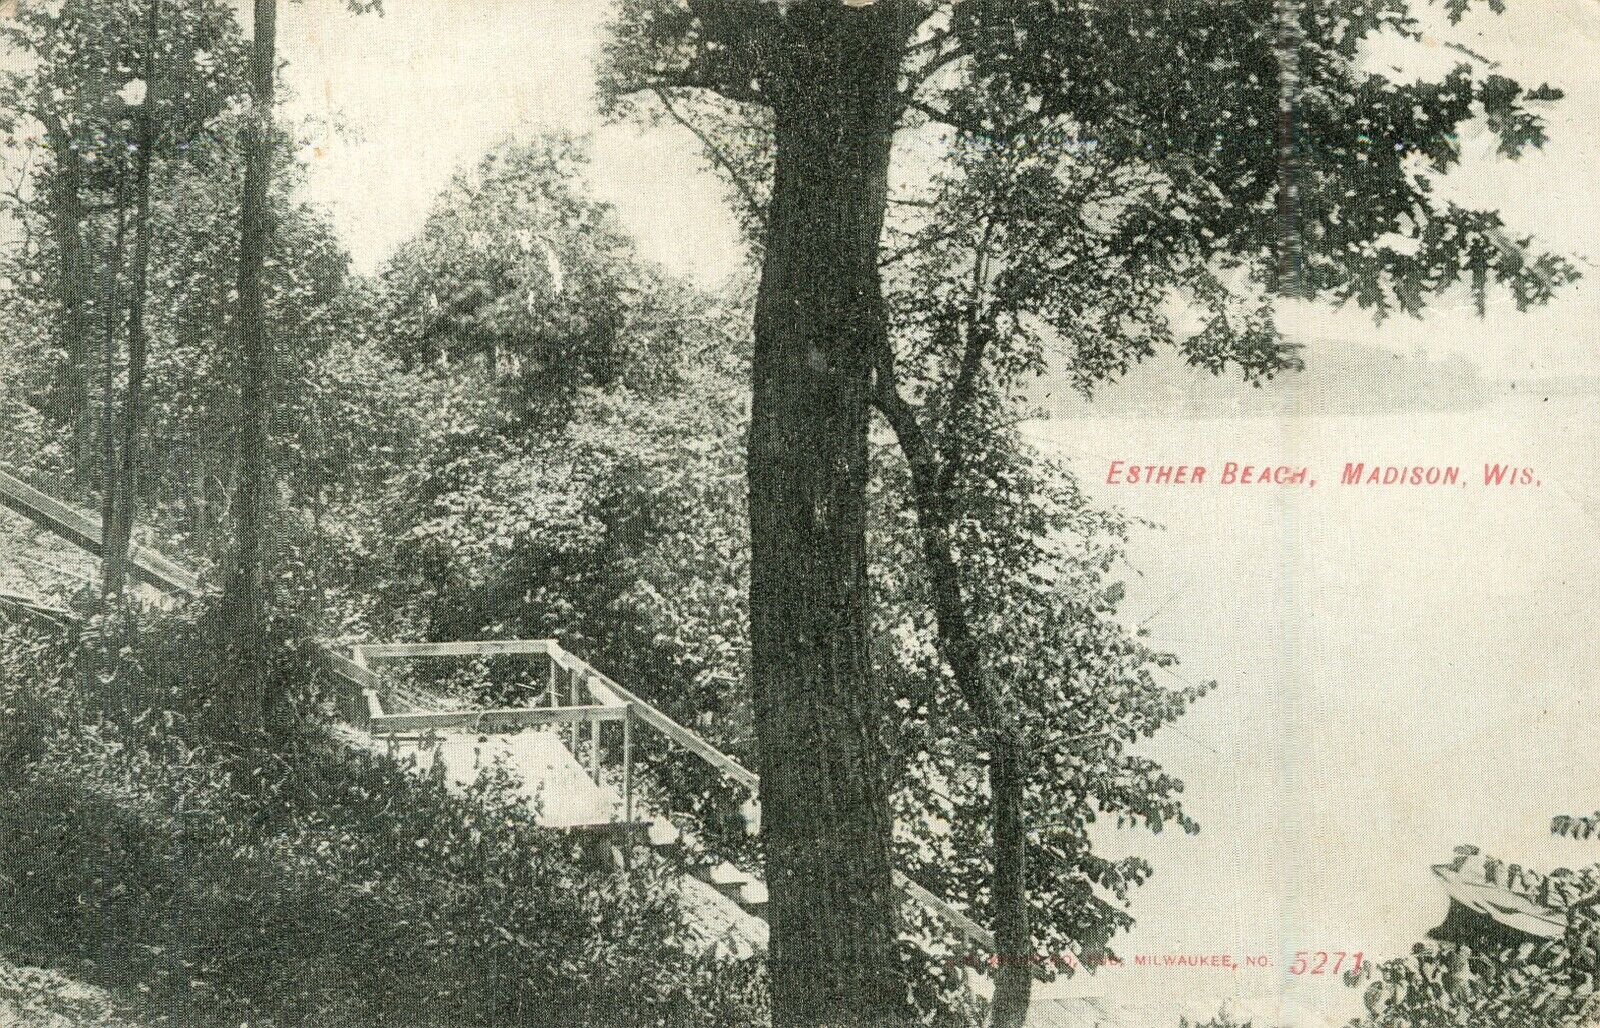 MADISON, Wisconsin, ESTHER BEACH Antique 1911 POSTCARD Steps down to beach